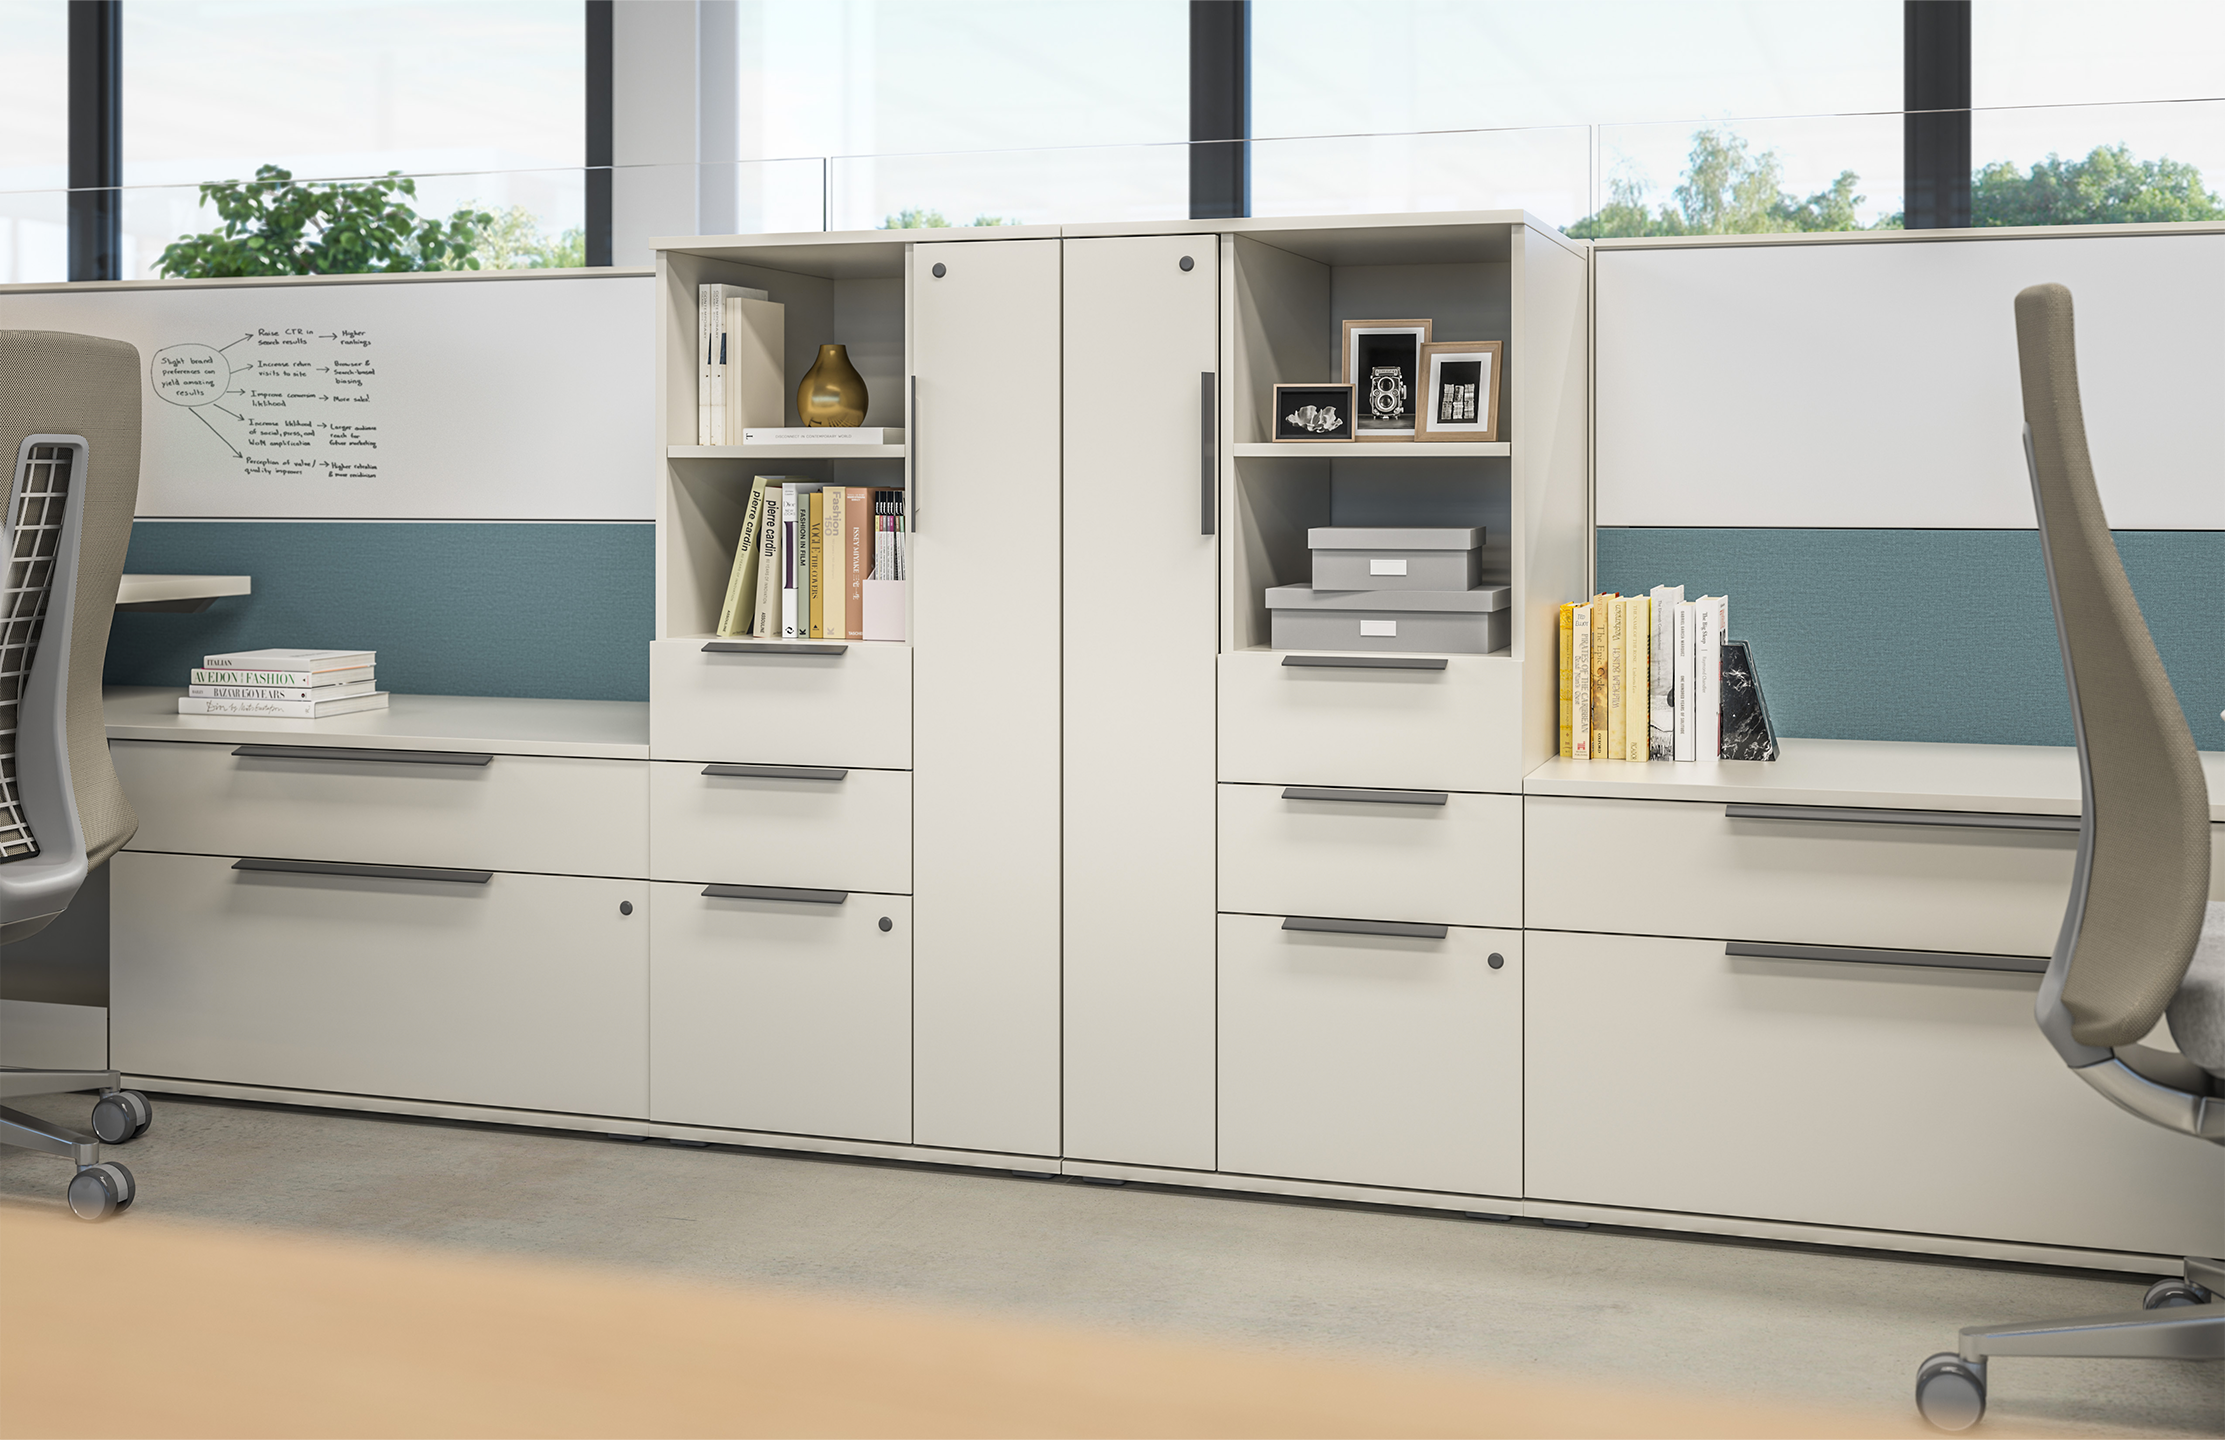 Be_Hold Be wardrobe and storage cabinets in white finish